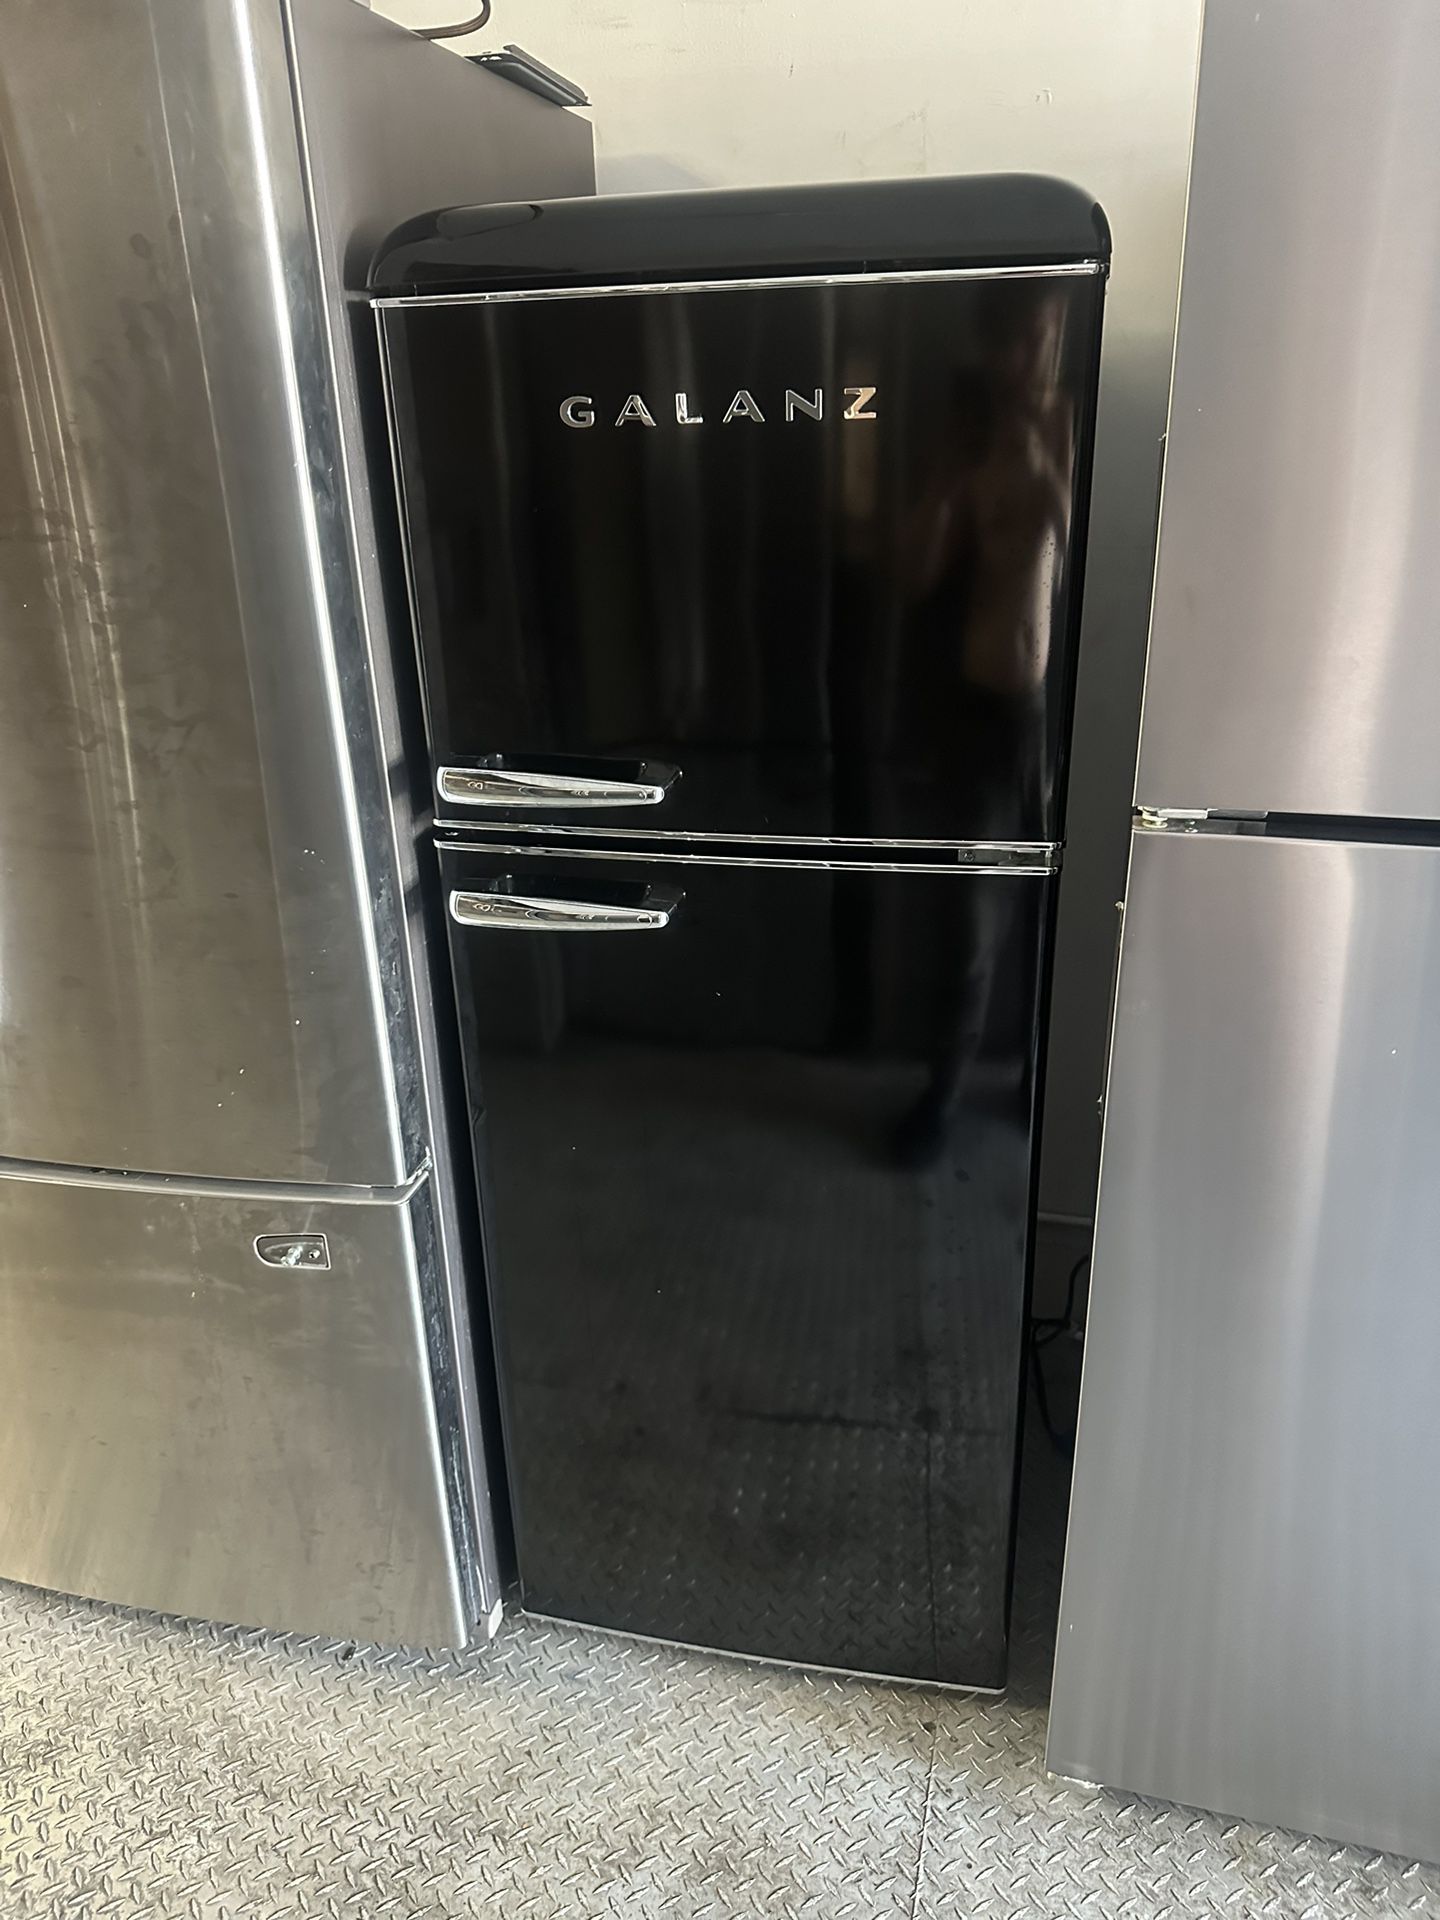 Nevera, Refrigerator Galanz, 24x25x62, Warranty 3 Months, Delivery Available 